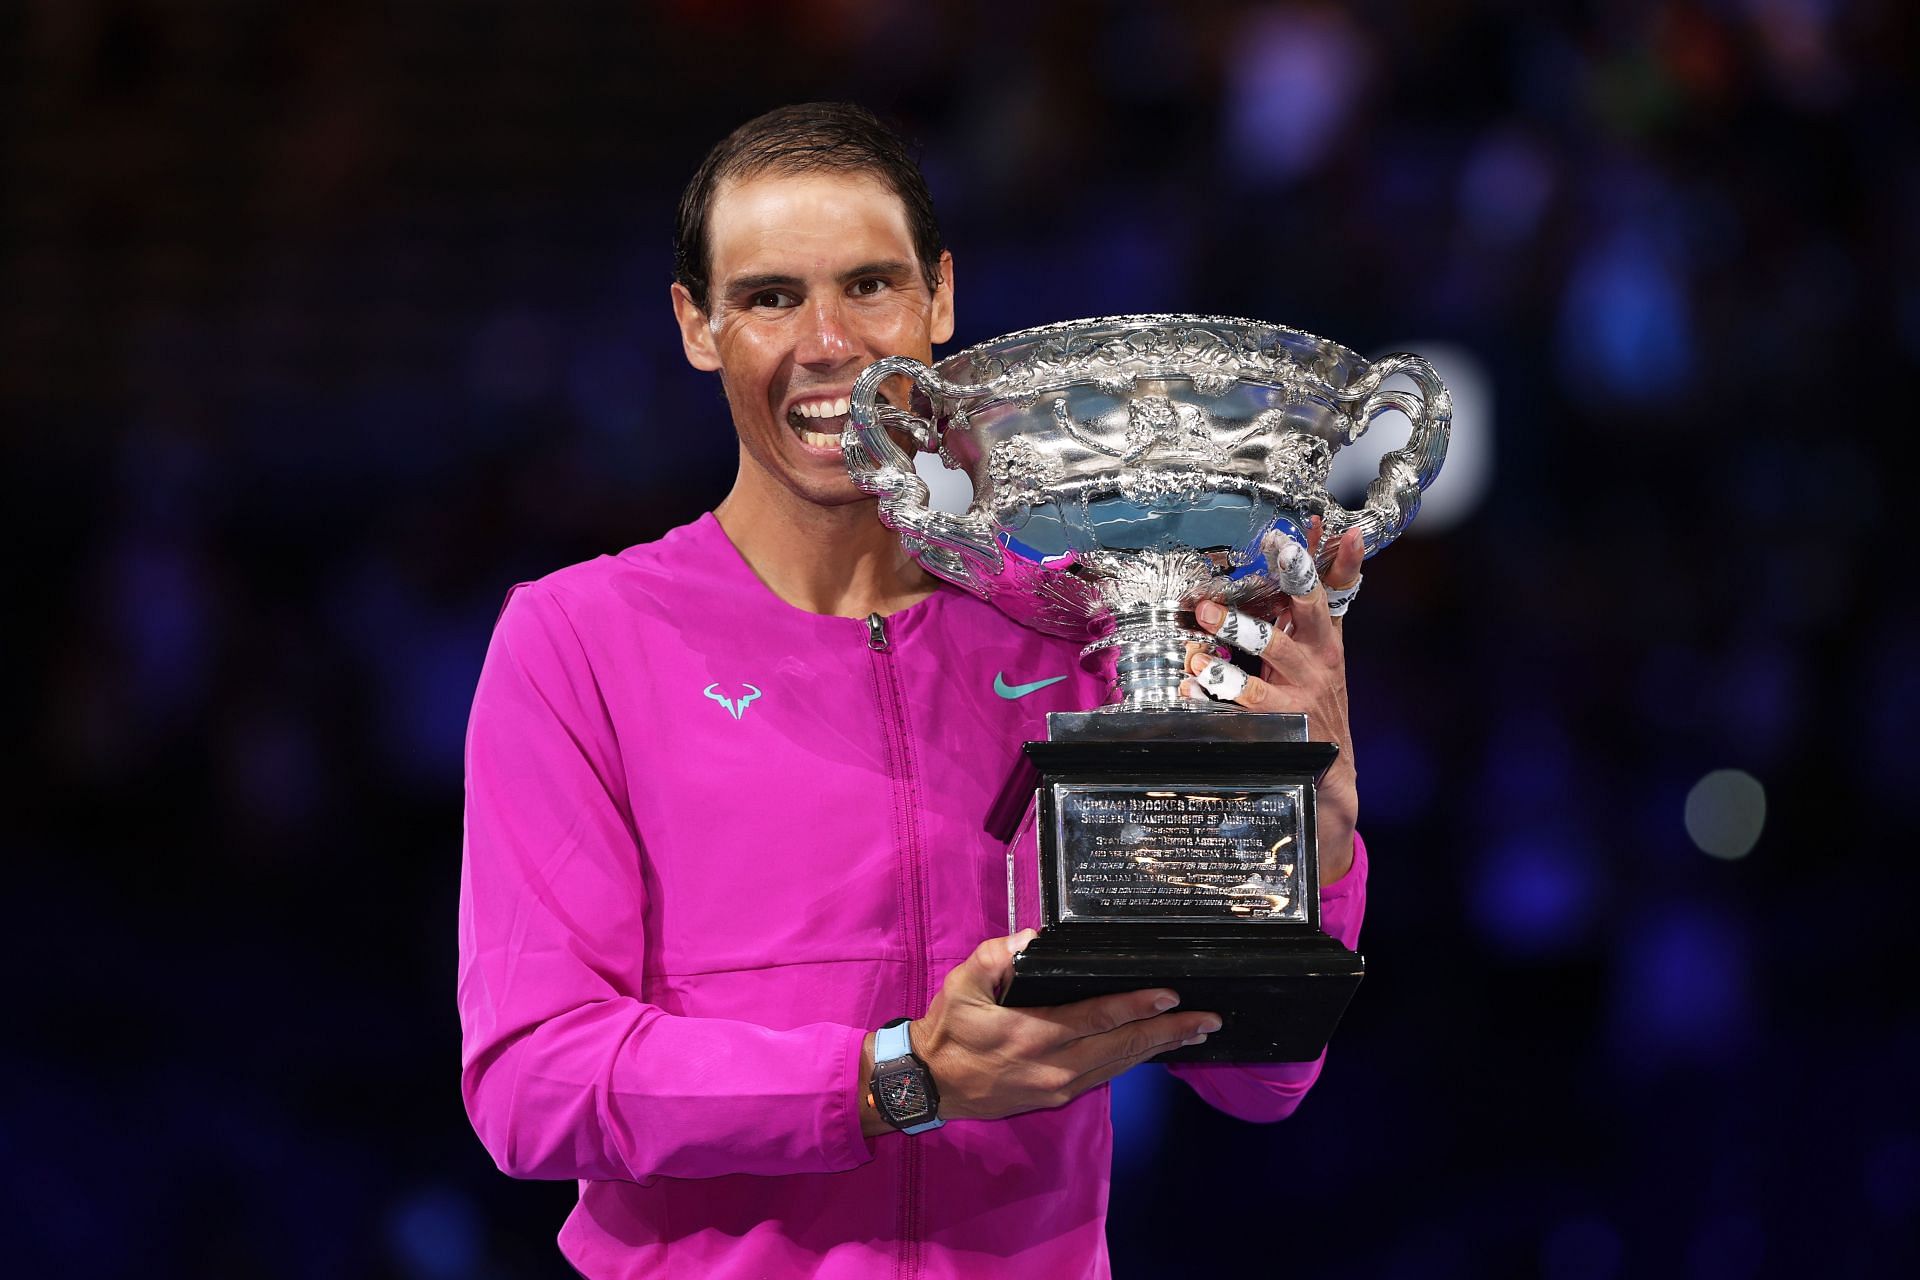 Rafael Nadal will be keen on winning his third title of the year